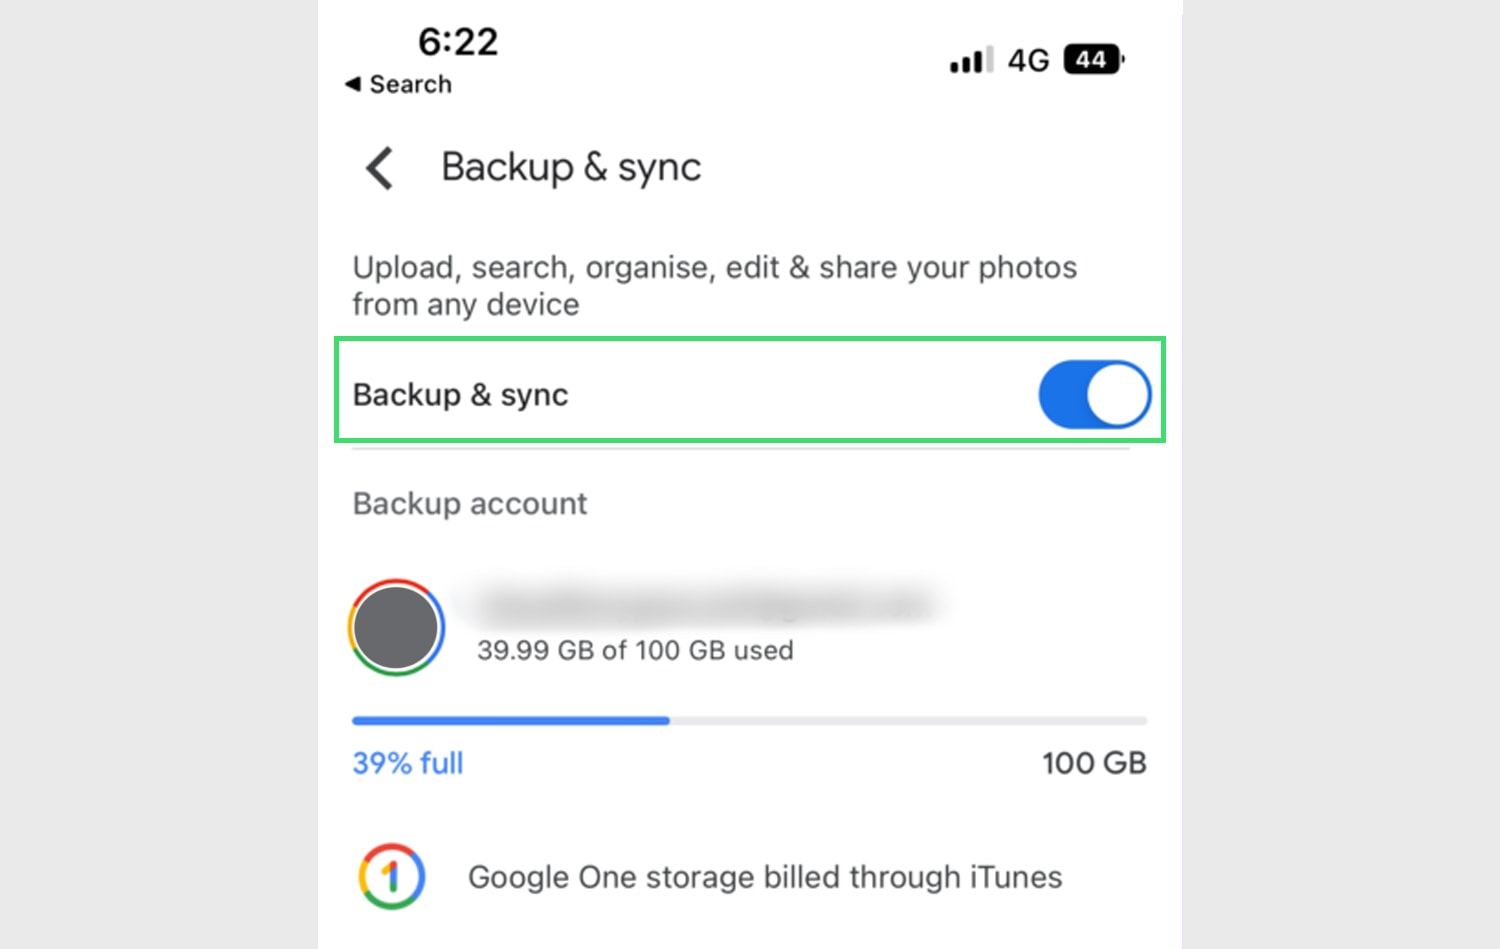 Syncing and Mobile Data